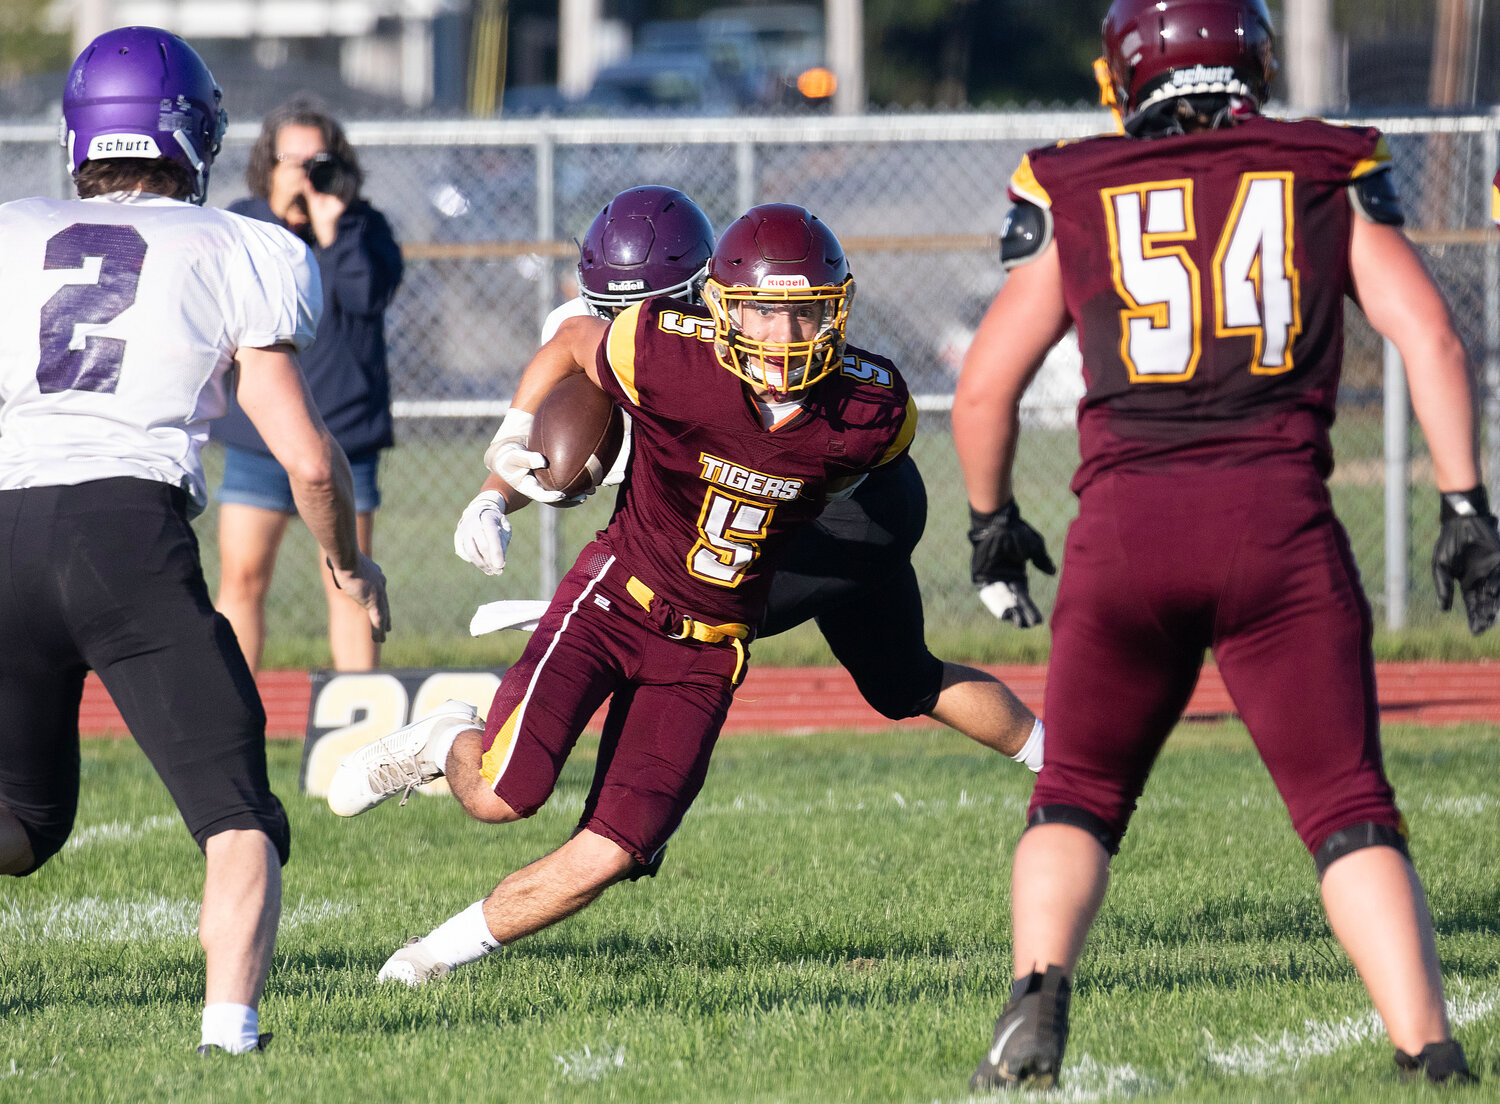 Junior wide receiver Roman Fauci looks to run upfield after making a catch.